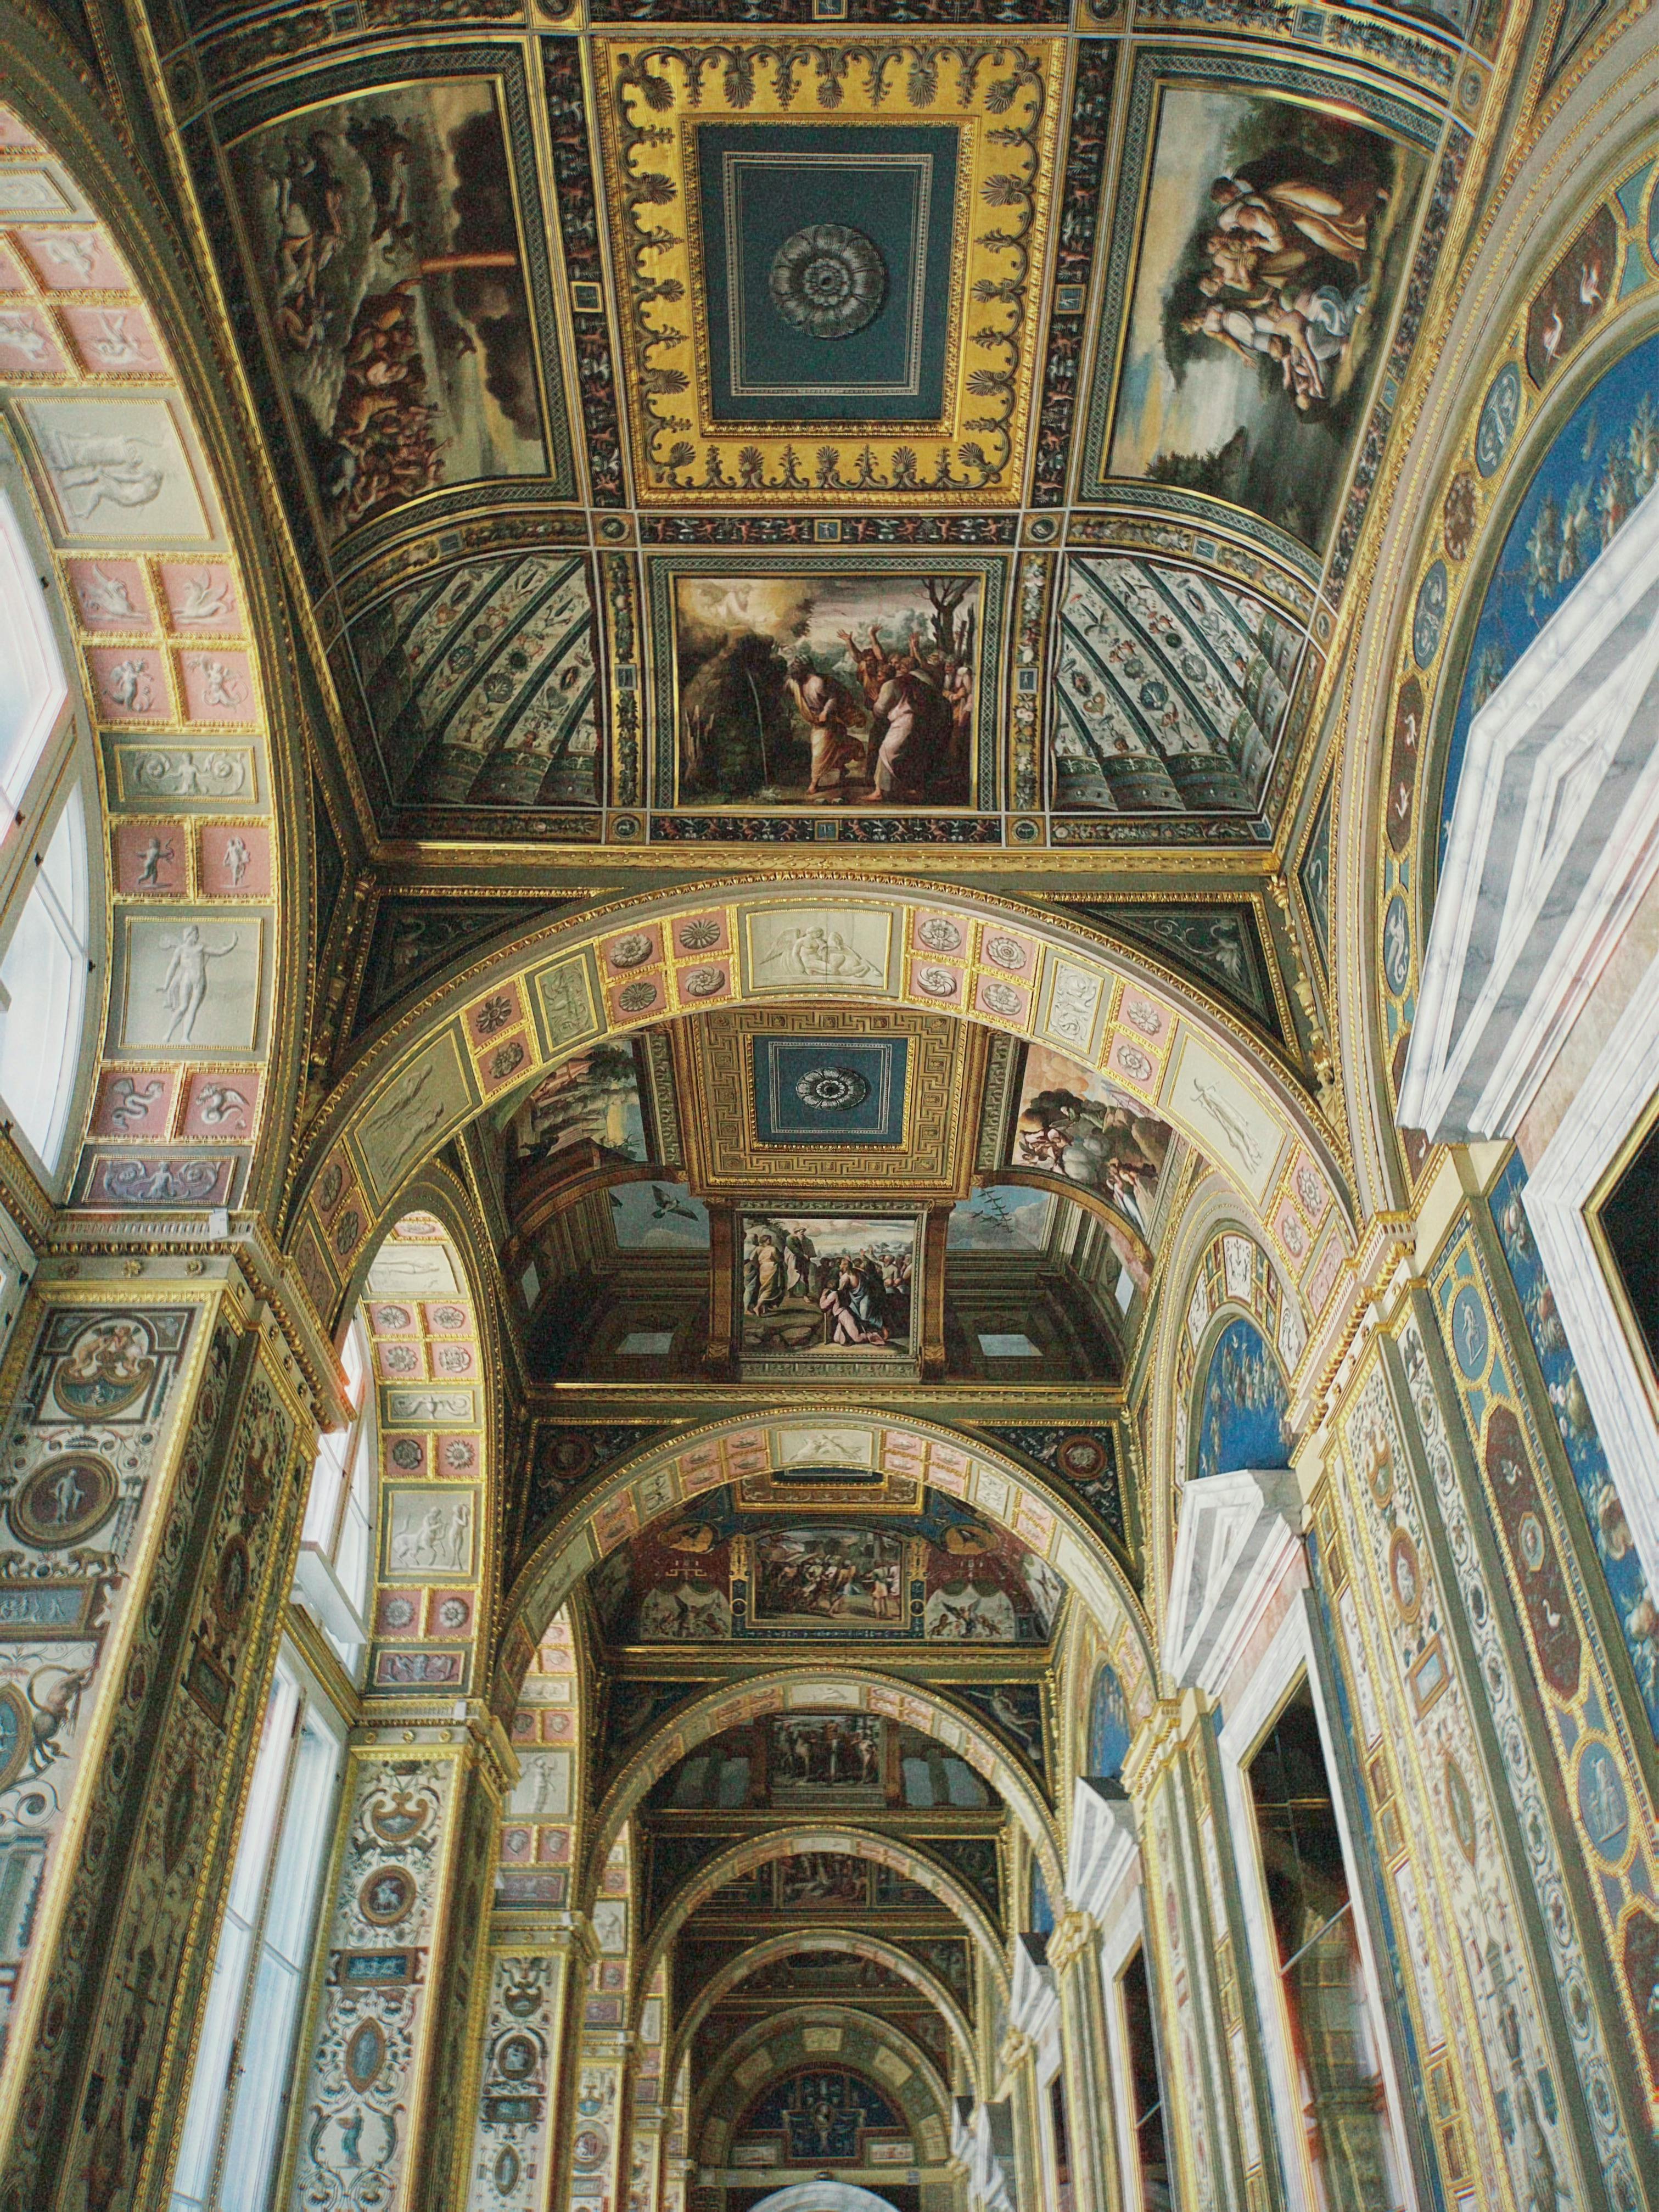 ornamented ceiling with paintings